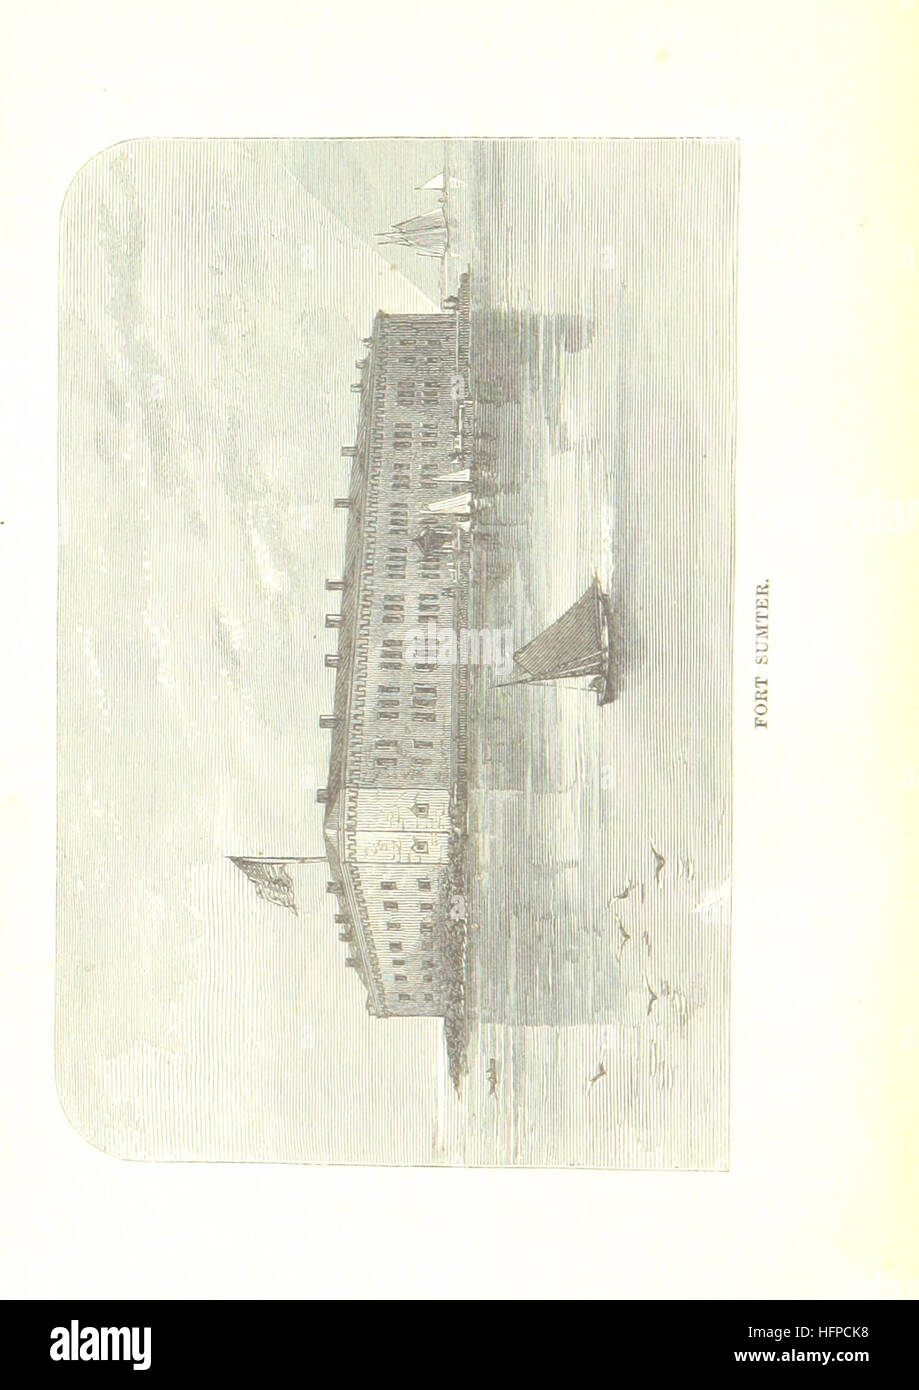 Reminiscences of Forts Sumter and Moultrie in 1860-'61 Image taken from page 8 of 'Reminiscences of Forts Sumter Stock Photo